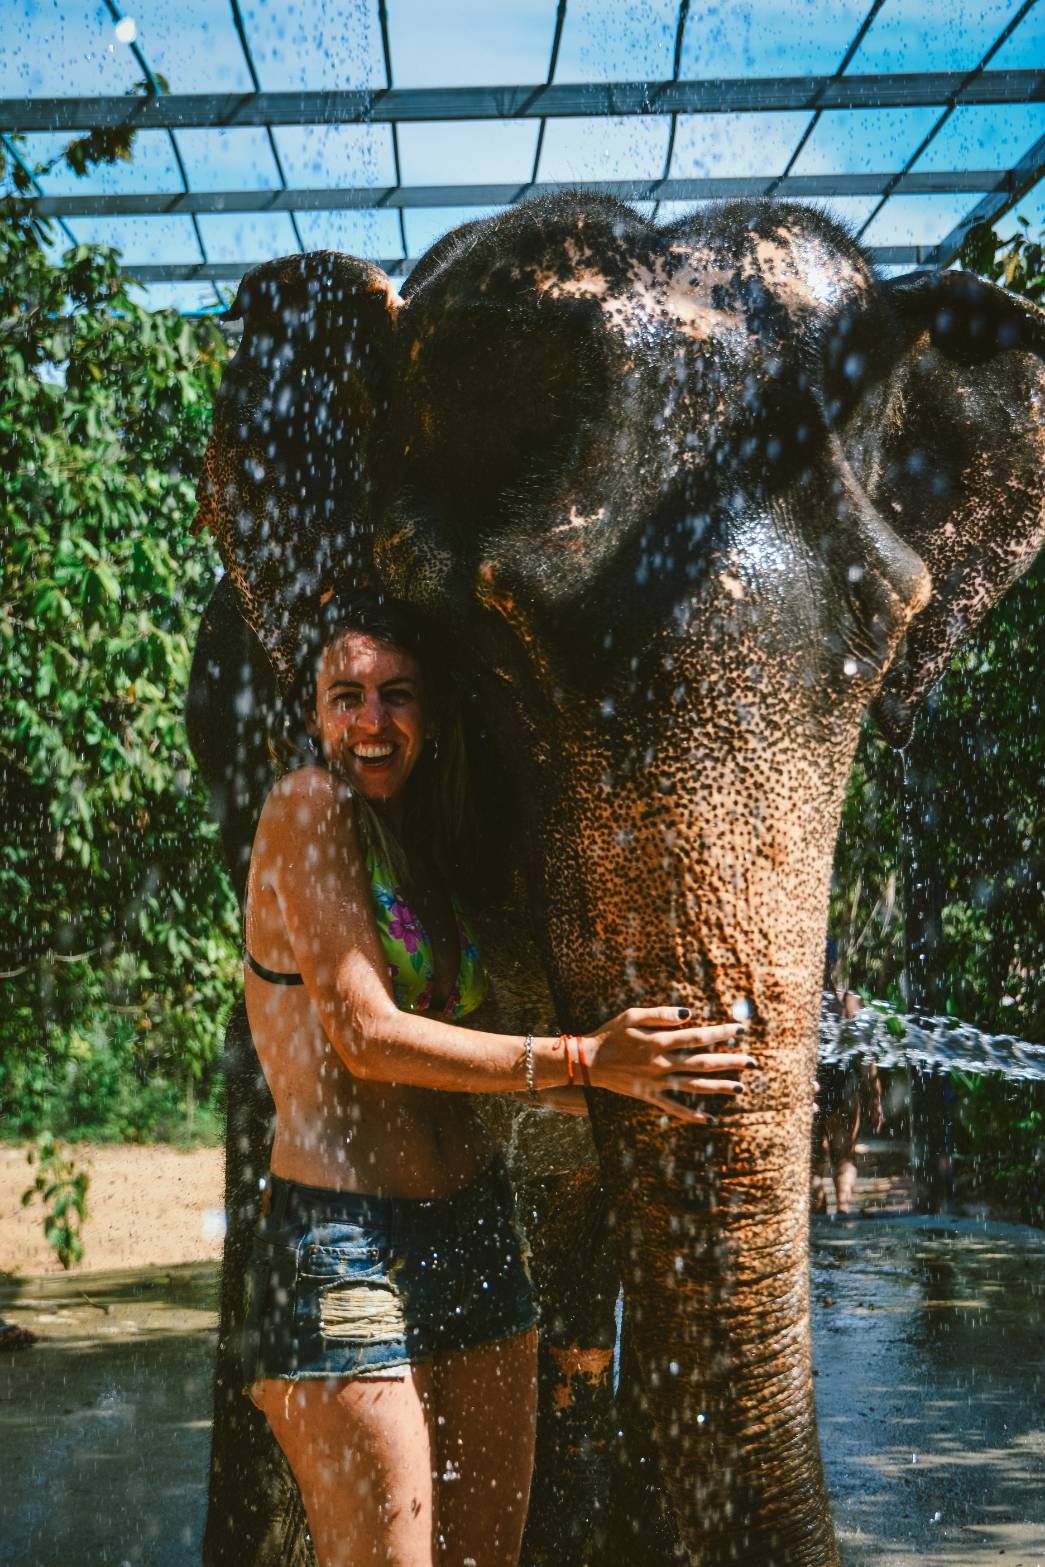 Shower with elephant